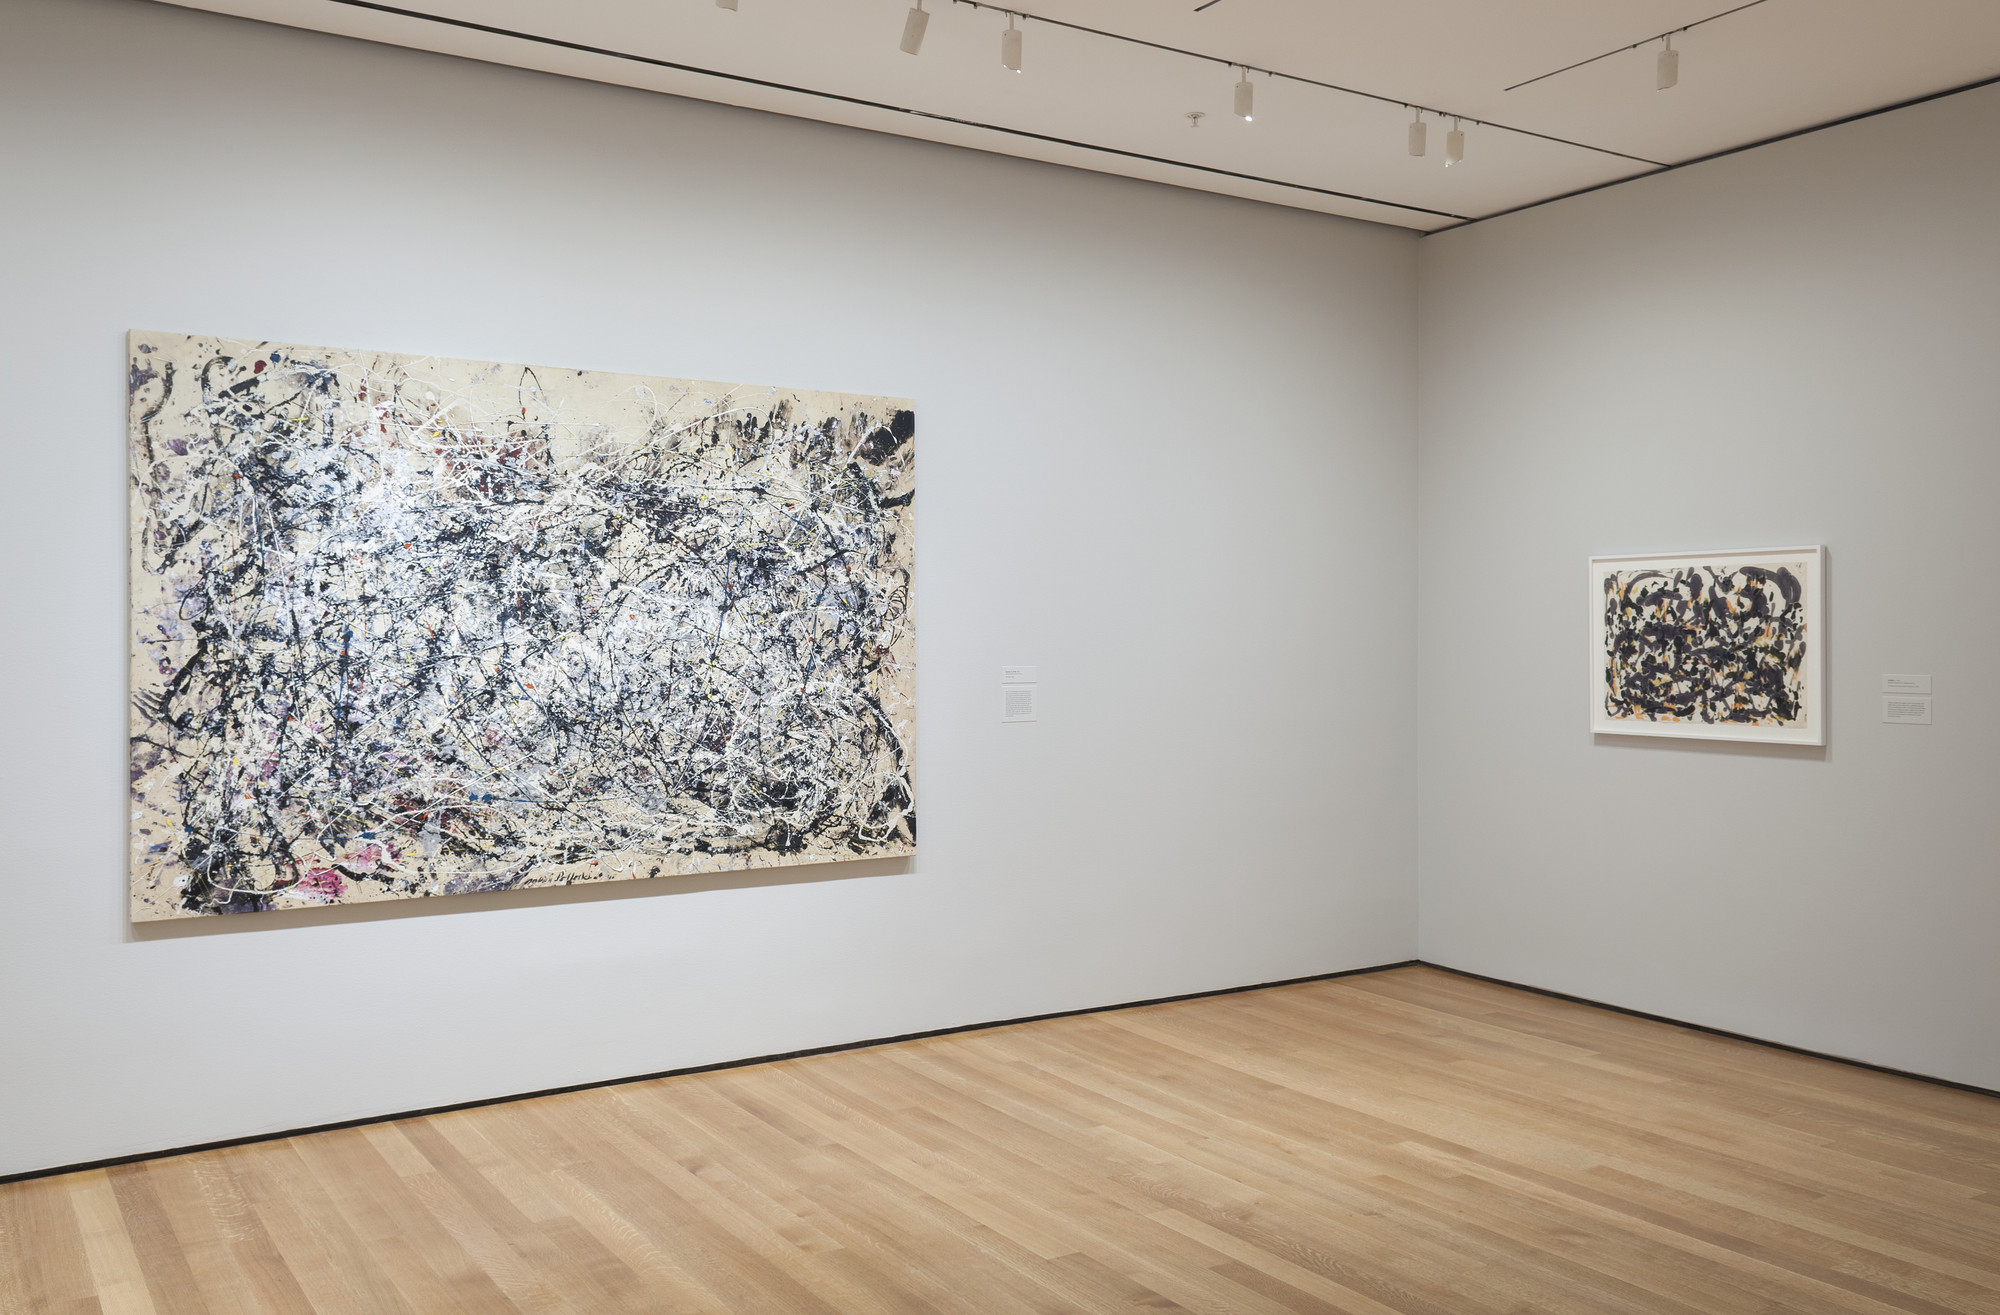 Installation view of the exhibition "Jackson Pollock: A Collection